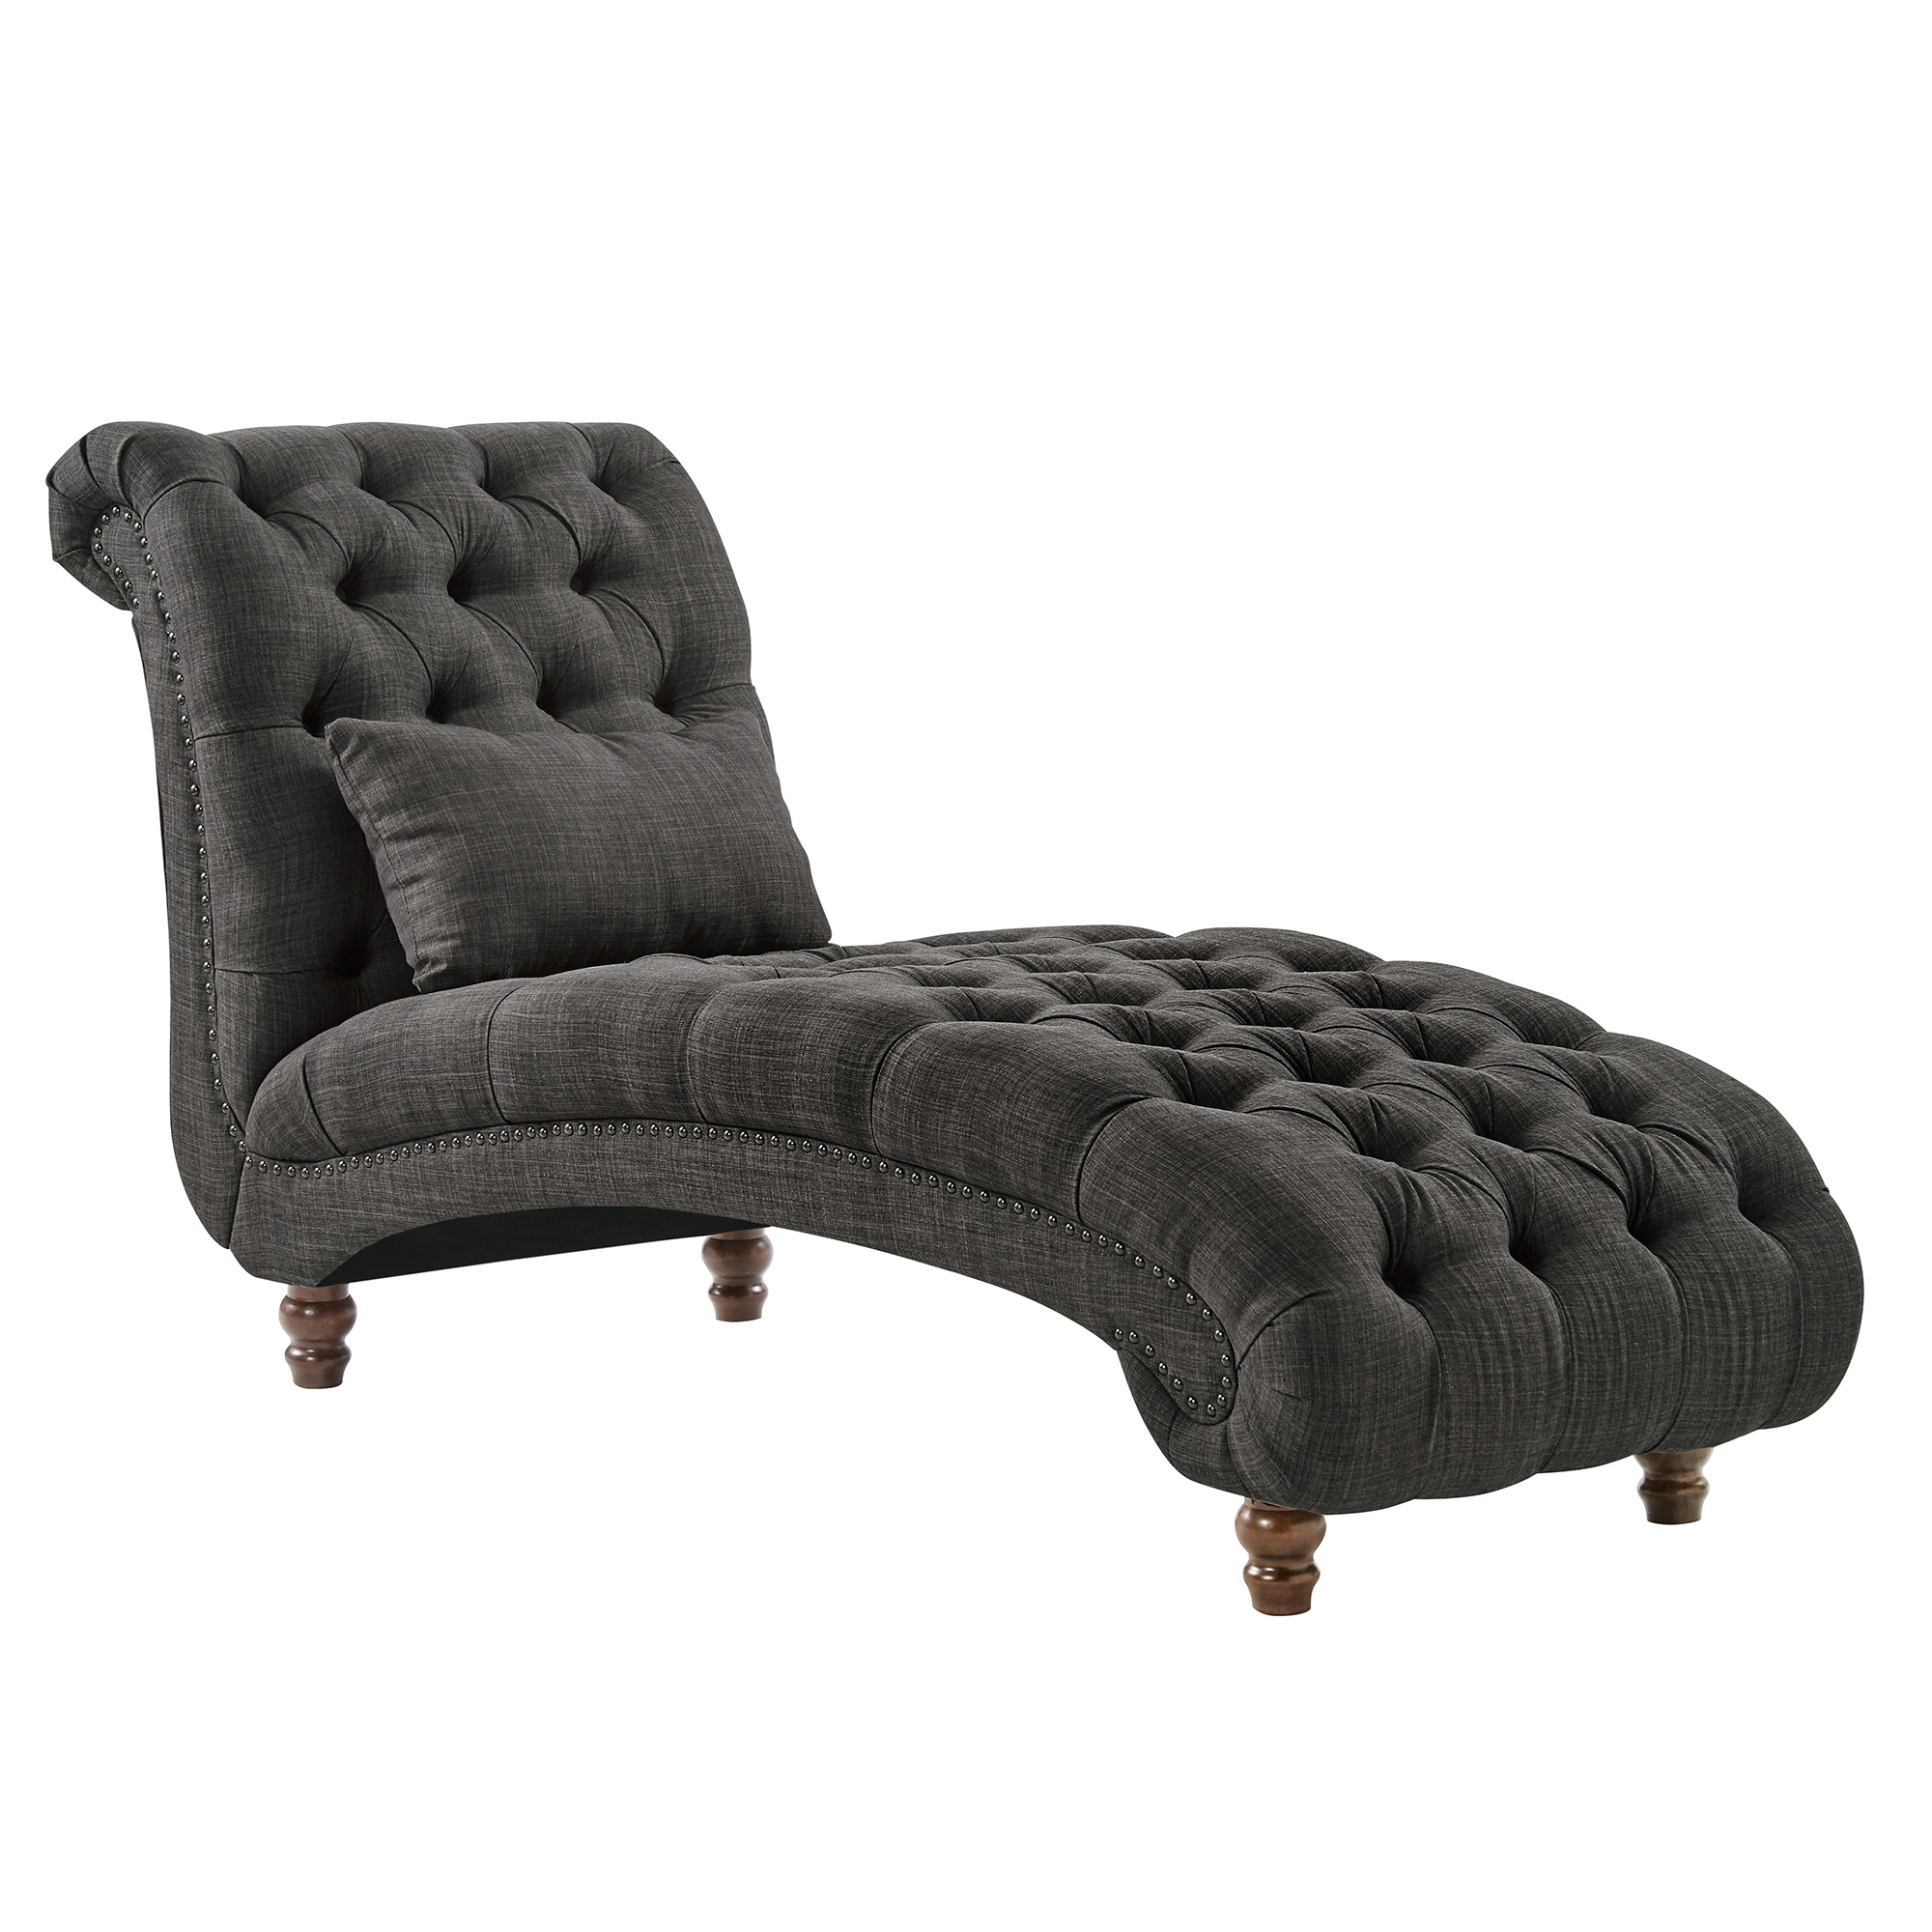 Weston Home Bowman Long Tufted Lounge Chair With Matching Pillow, Dark Gray Linen - image 2 of 6